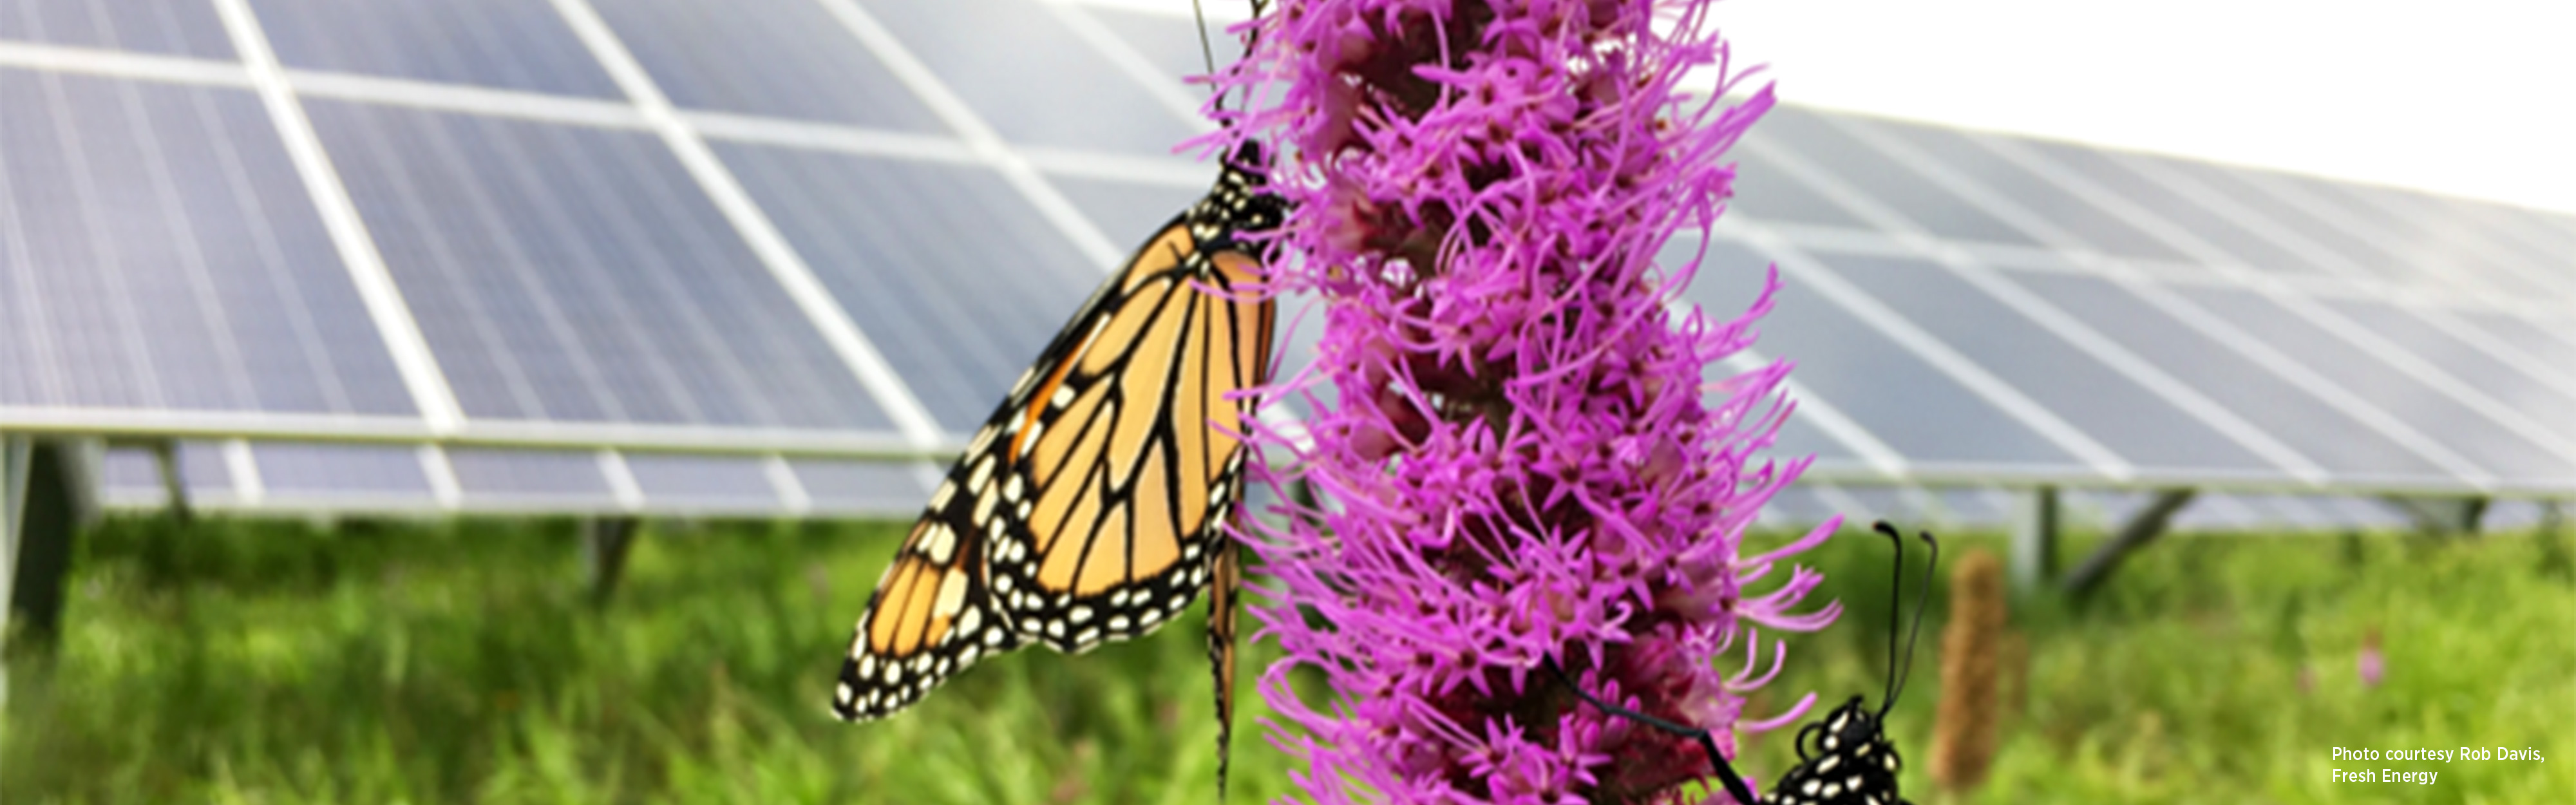 Close up on a purple flower with butterflies against a backdrop of solar panels.